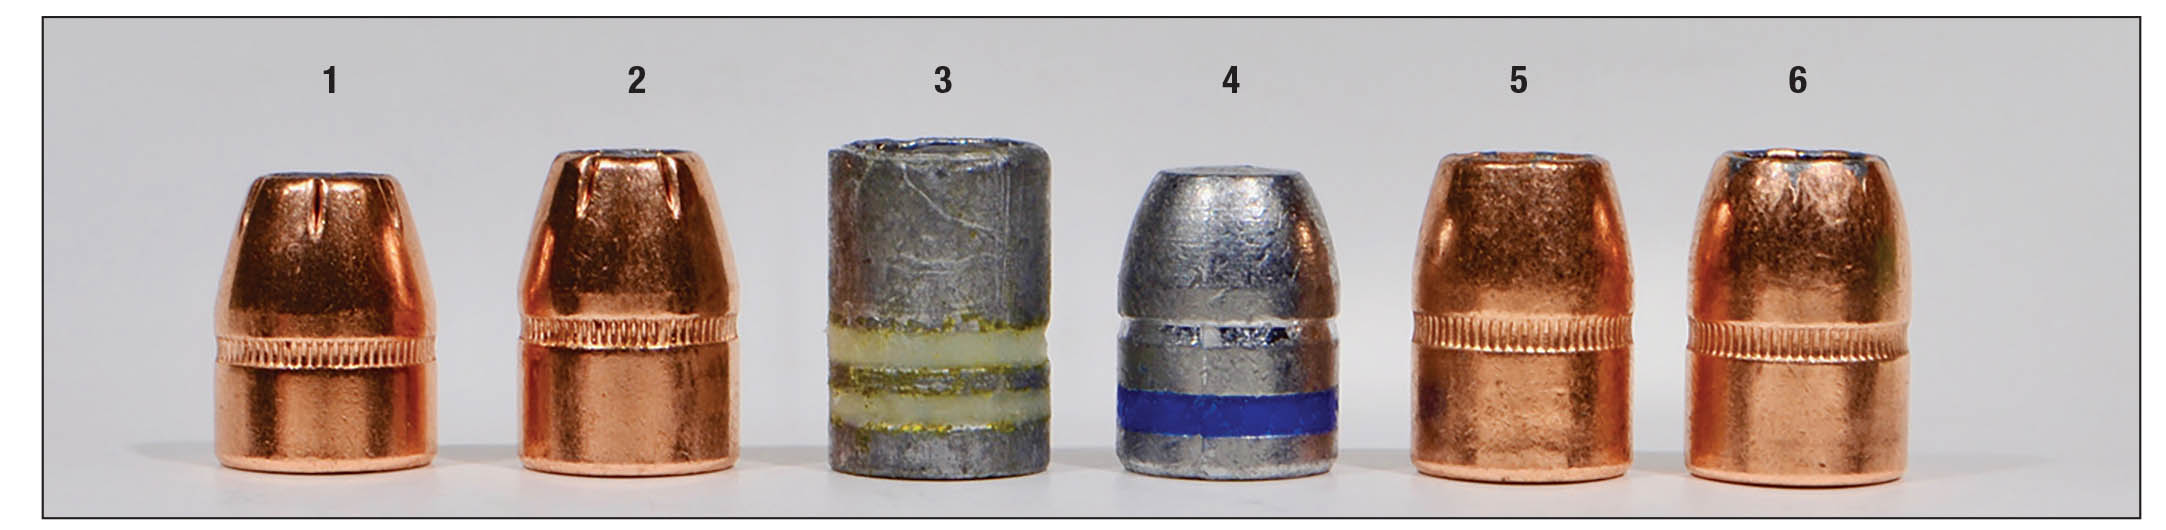 Bullets tested include the Hornady 180-grain XTP, (2) Hornady 200 XTP, (3) Hayley 200 Man-Stopper, (4) Shooter’s Choice 200 flatnose, (5) Speer 210 Gold Dot and the (6) Speer 200 Gold Dot.